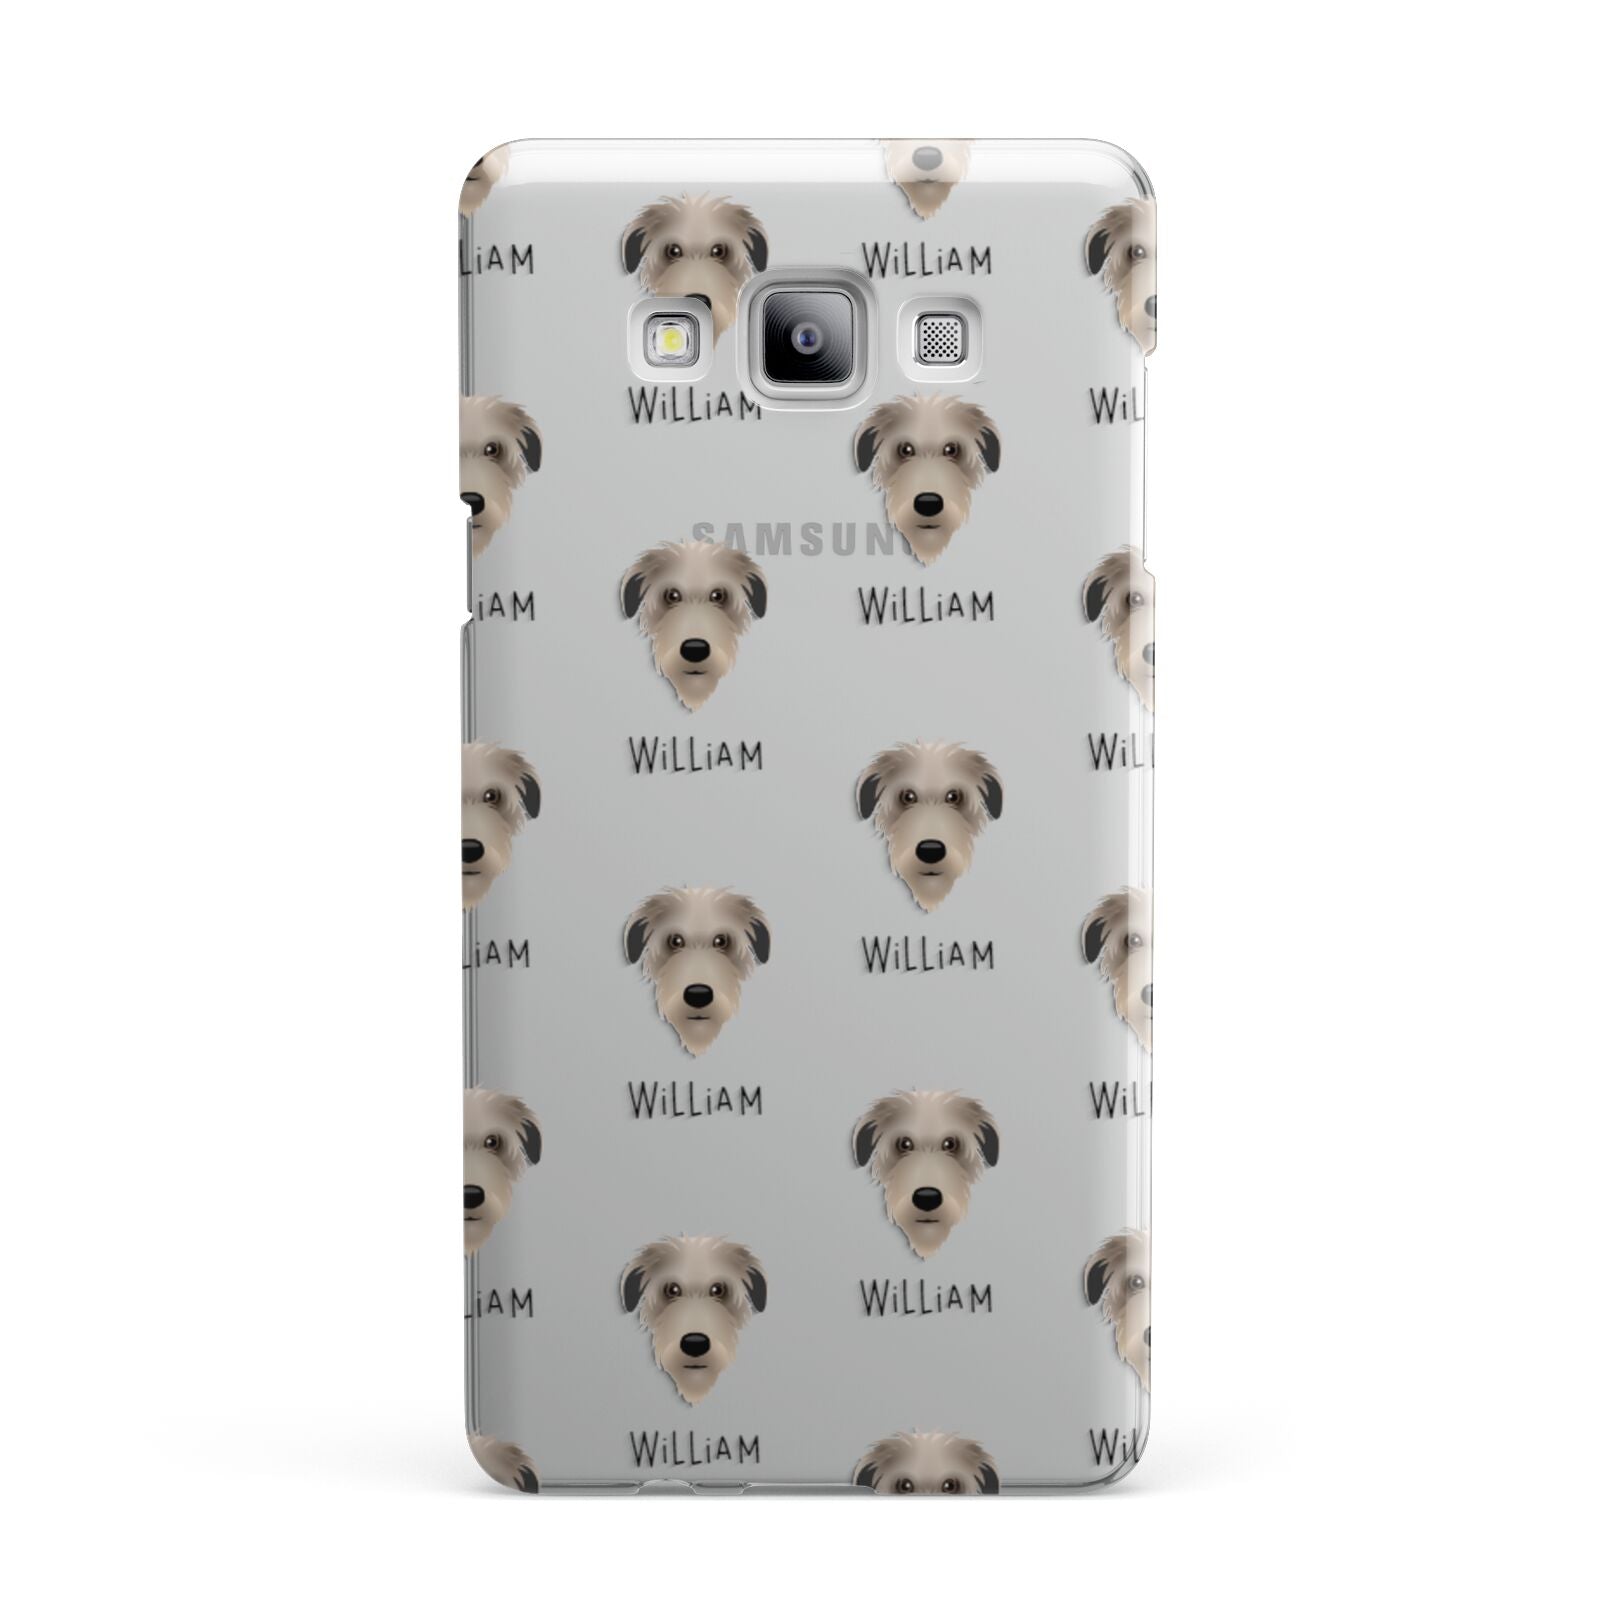 Deerhound Icon with Name Samsung Galaxy A7 2015 Case